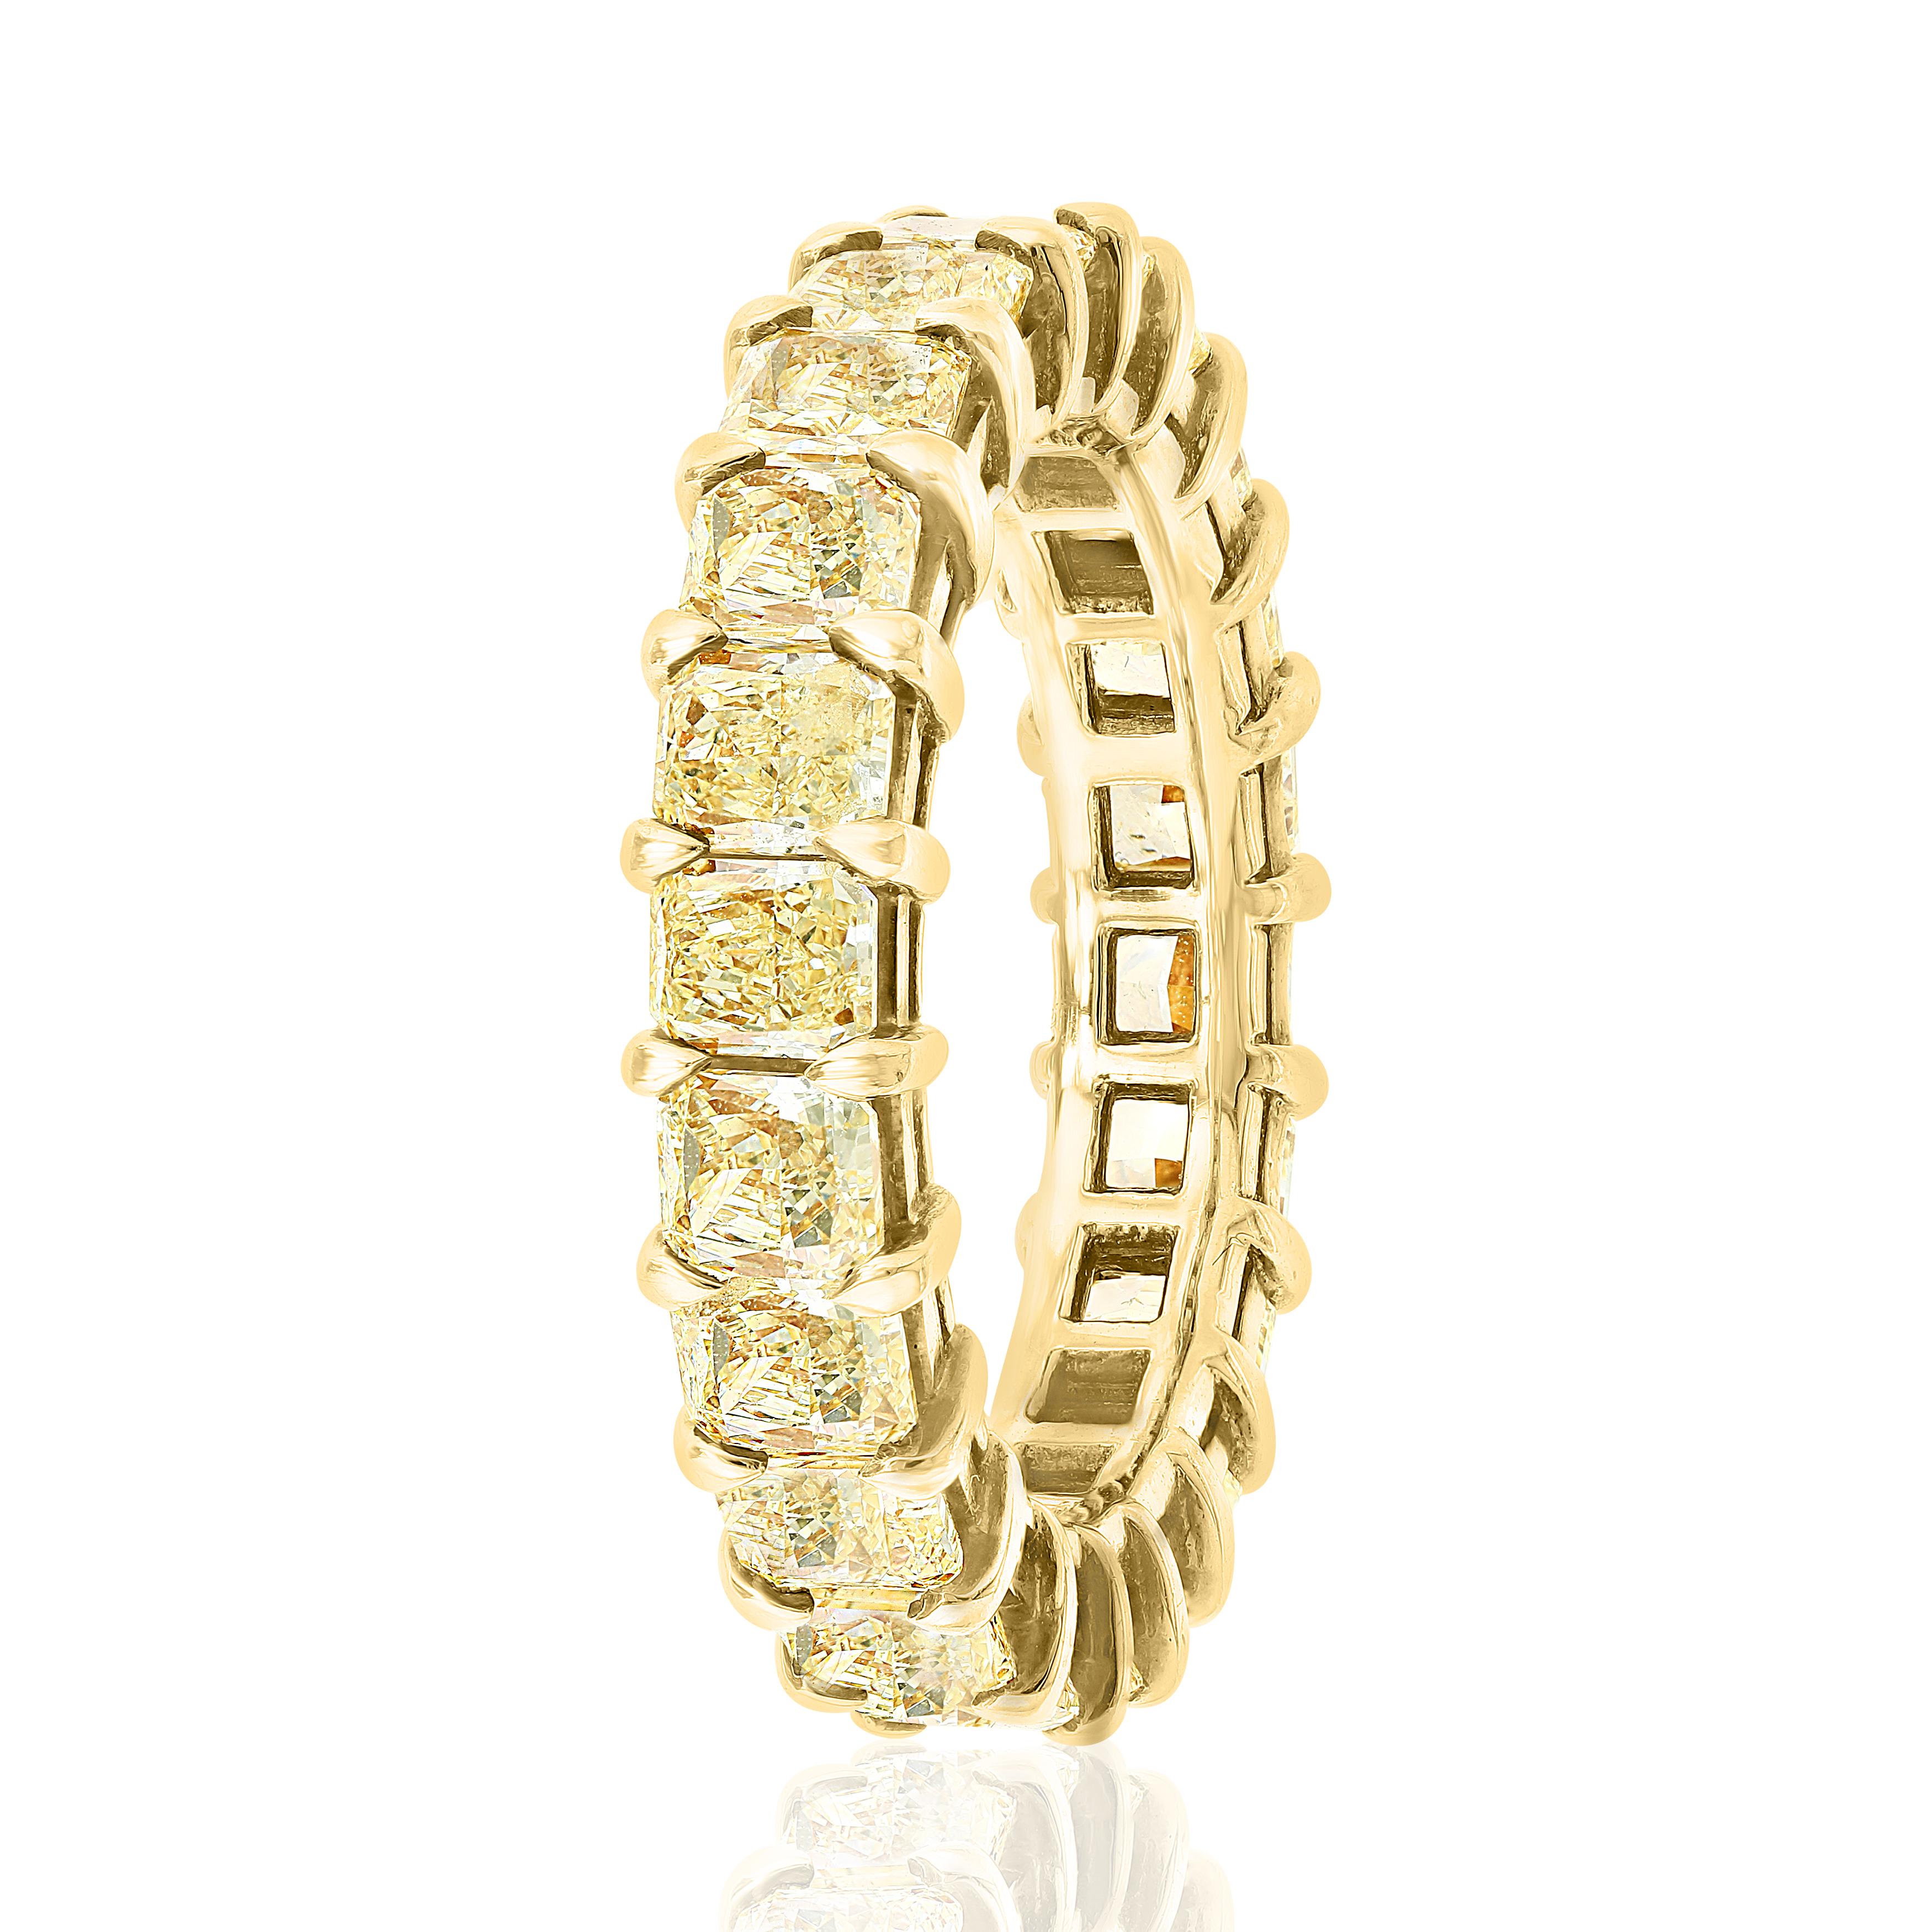 Radiant Cut Auction - 3.89 Carat Radiant Fancy Yellow Diamond Eternity Band Ring For Sale